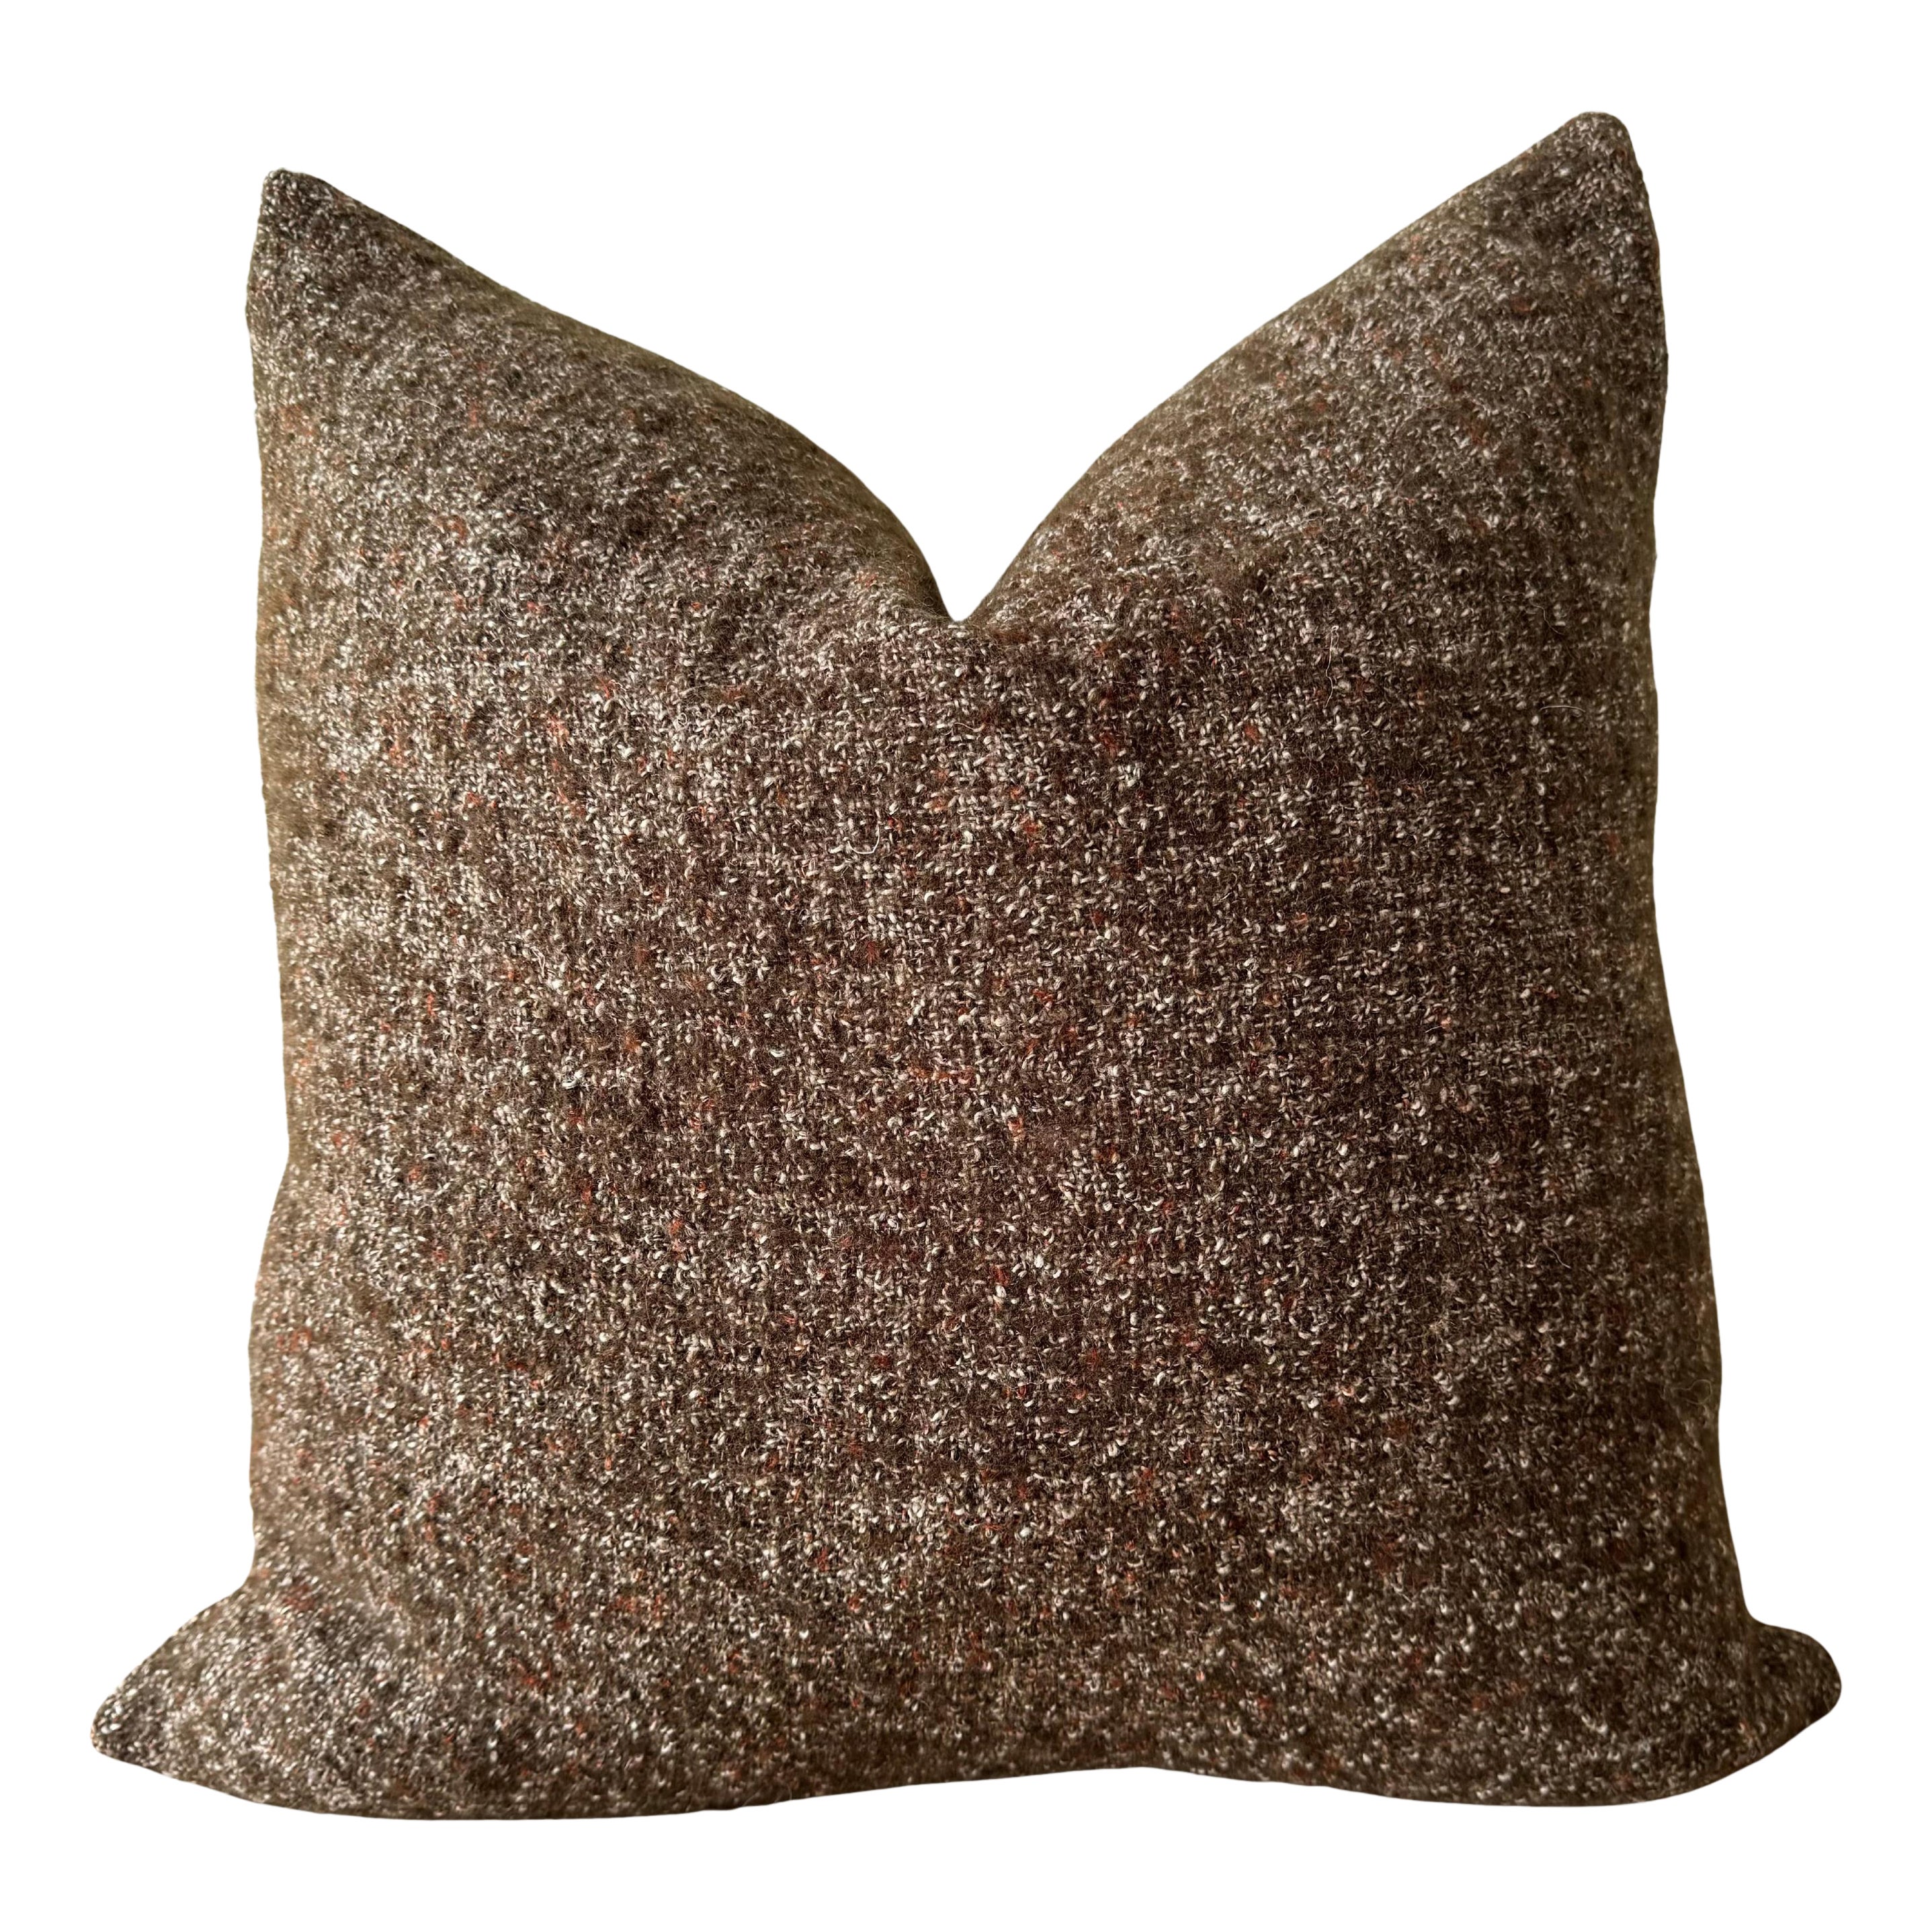 Custom Wool and Linen Pillow with Down Feather Insert in Coco Brown and Rust